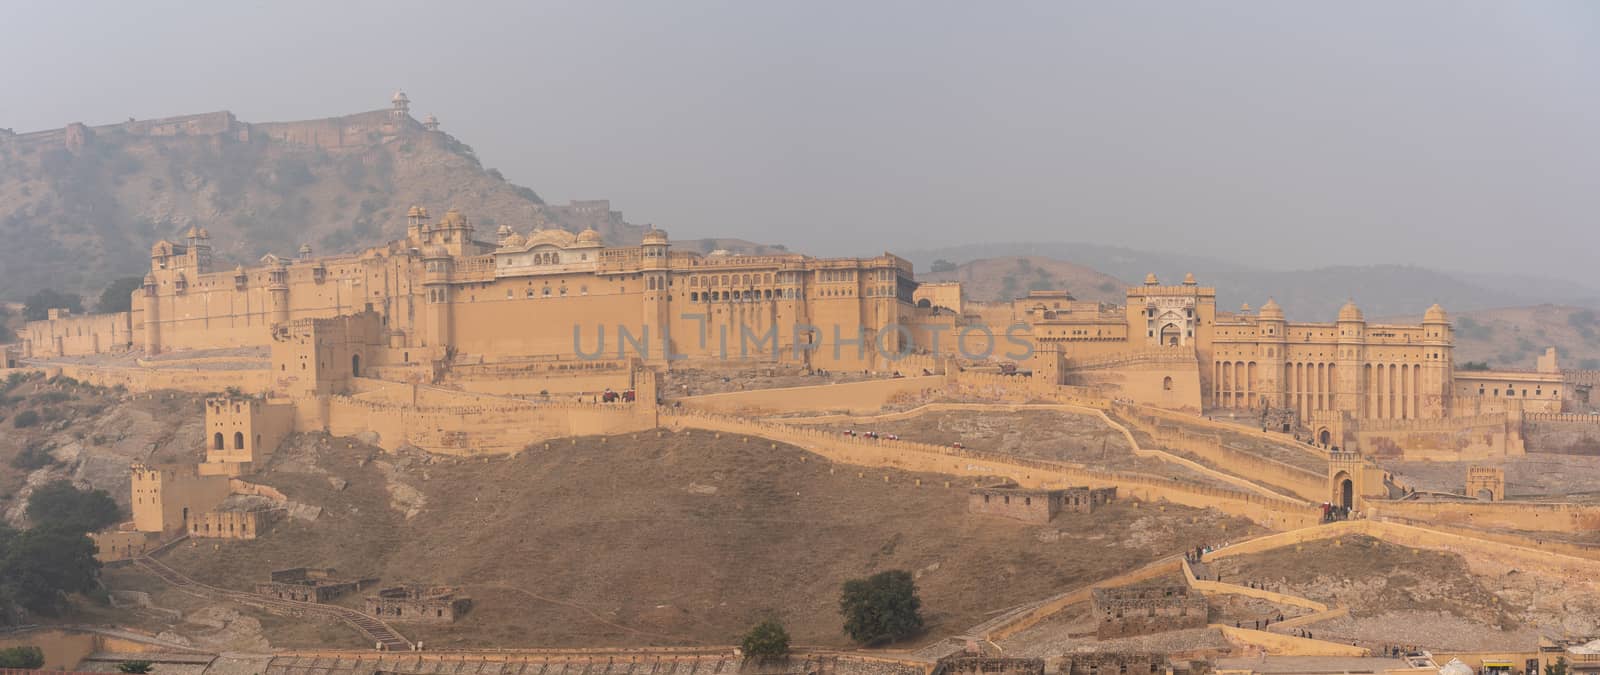 Jaipur, India - December 12, 2019: Exterior view of the historic Amber Fort